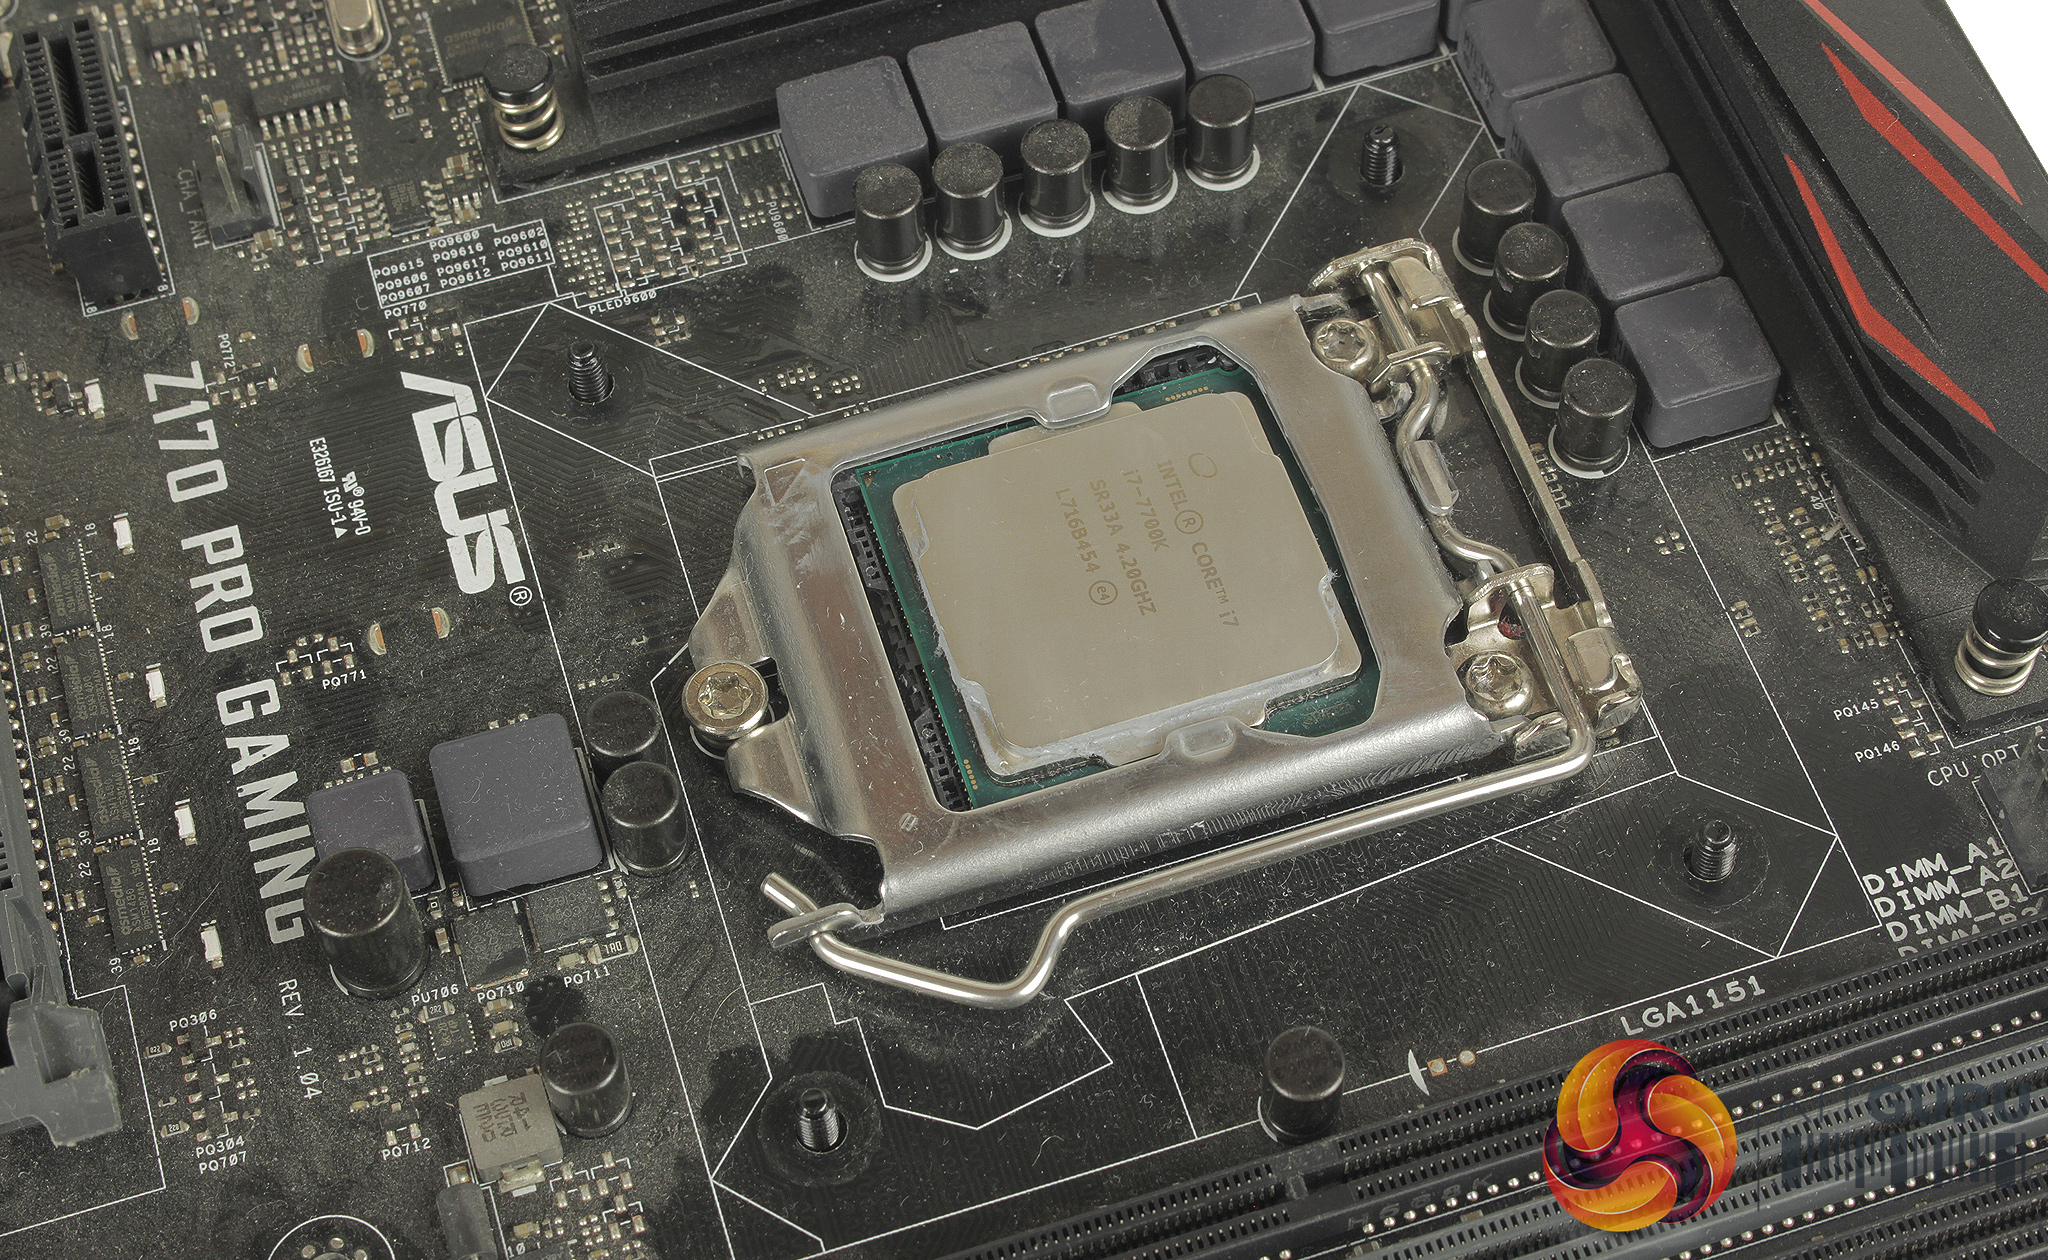 will the dark rock pro 4 fit on this motherboard? - CPUs